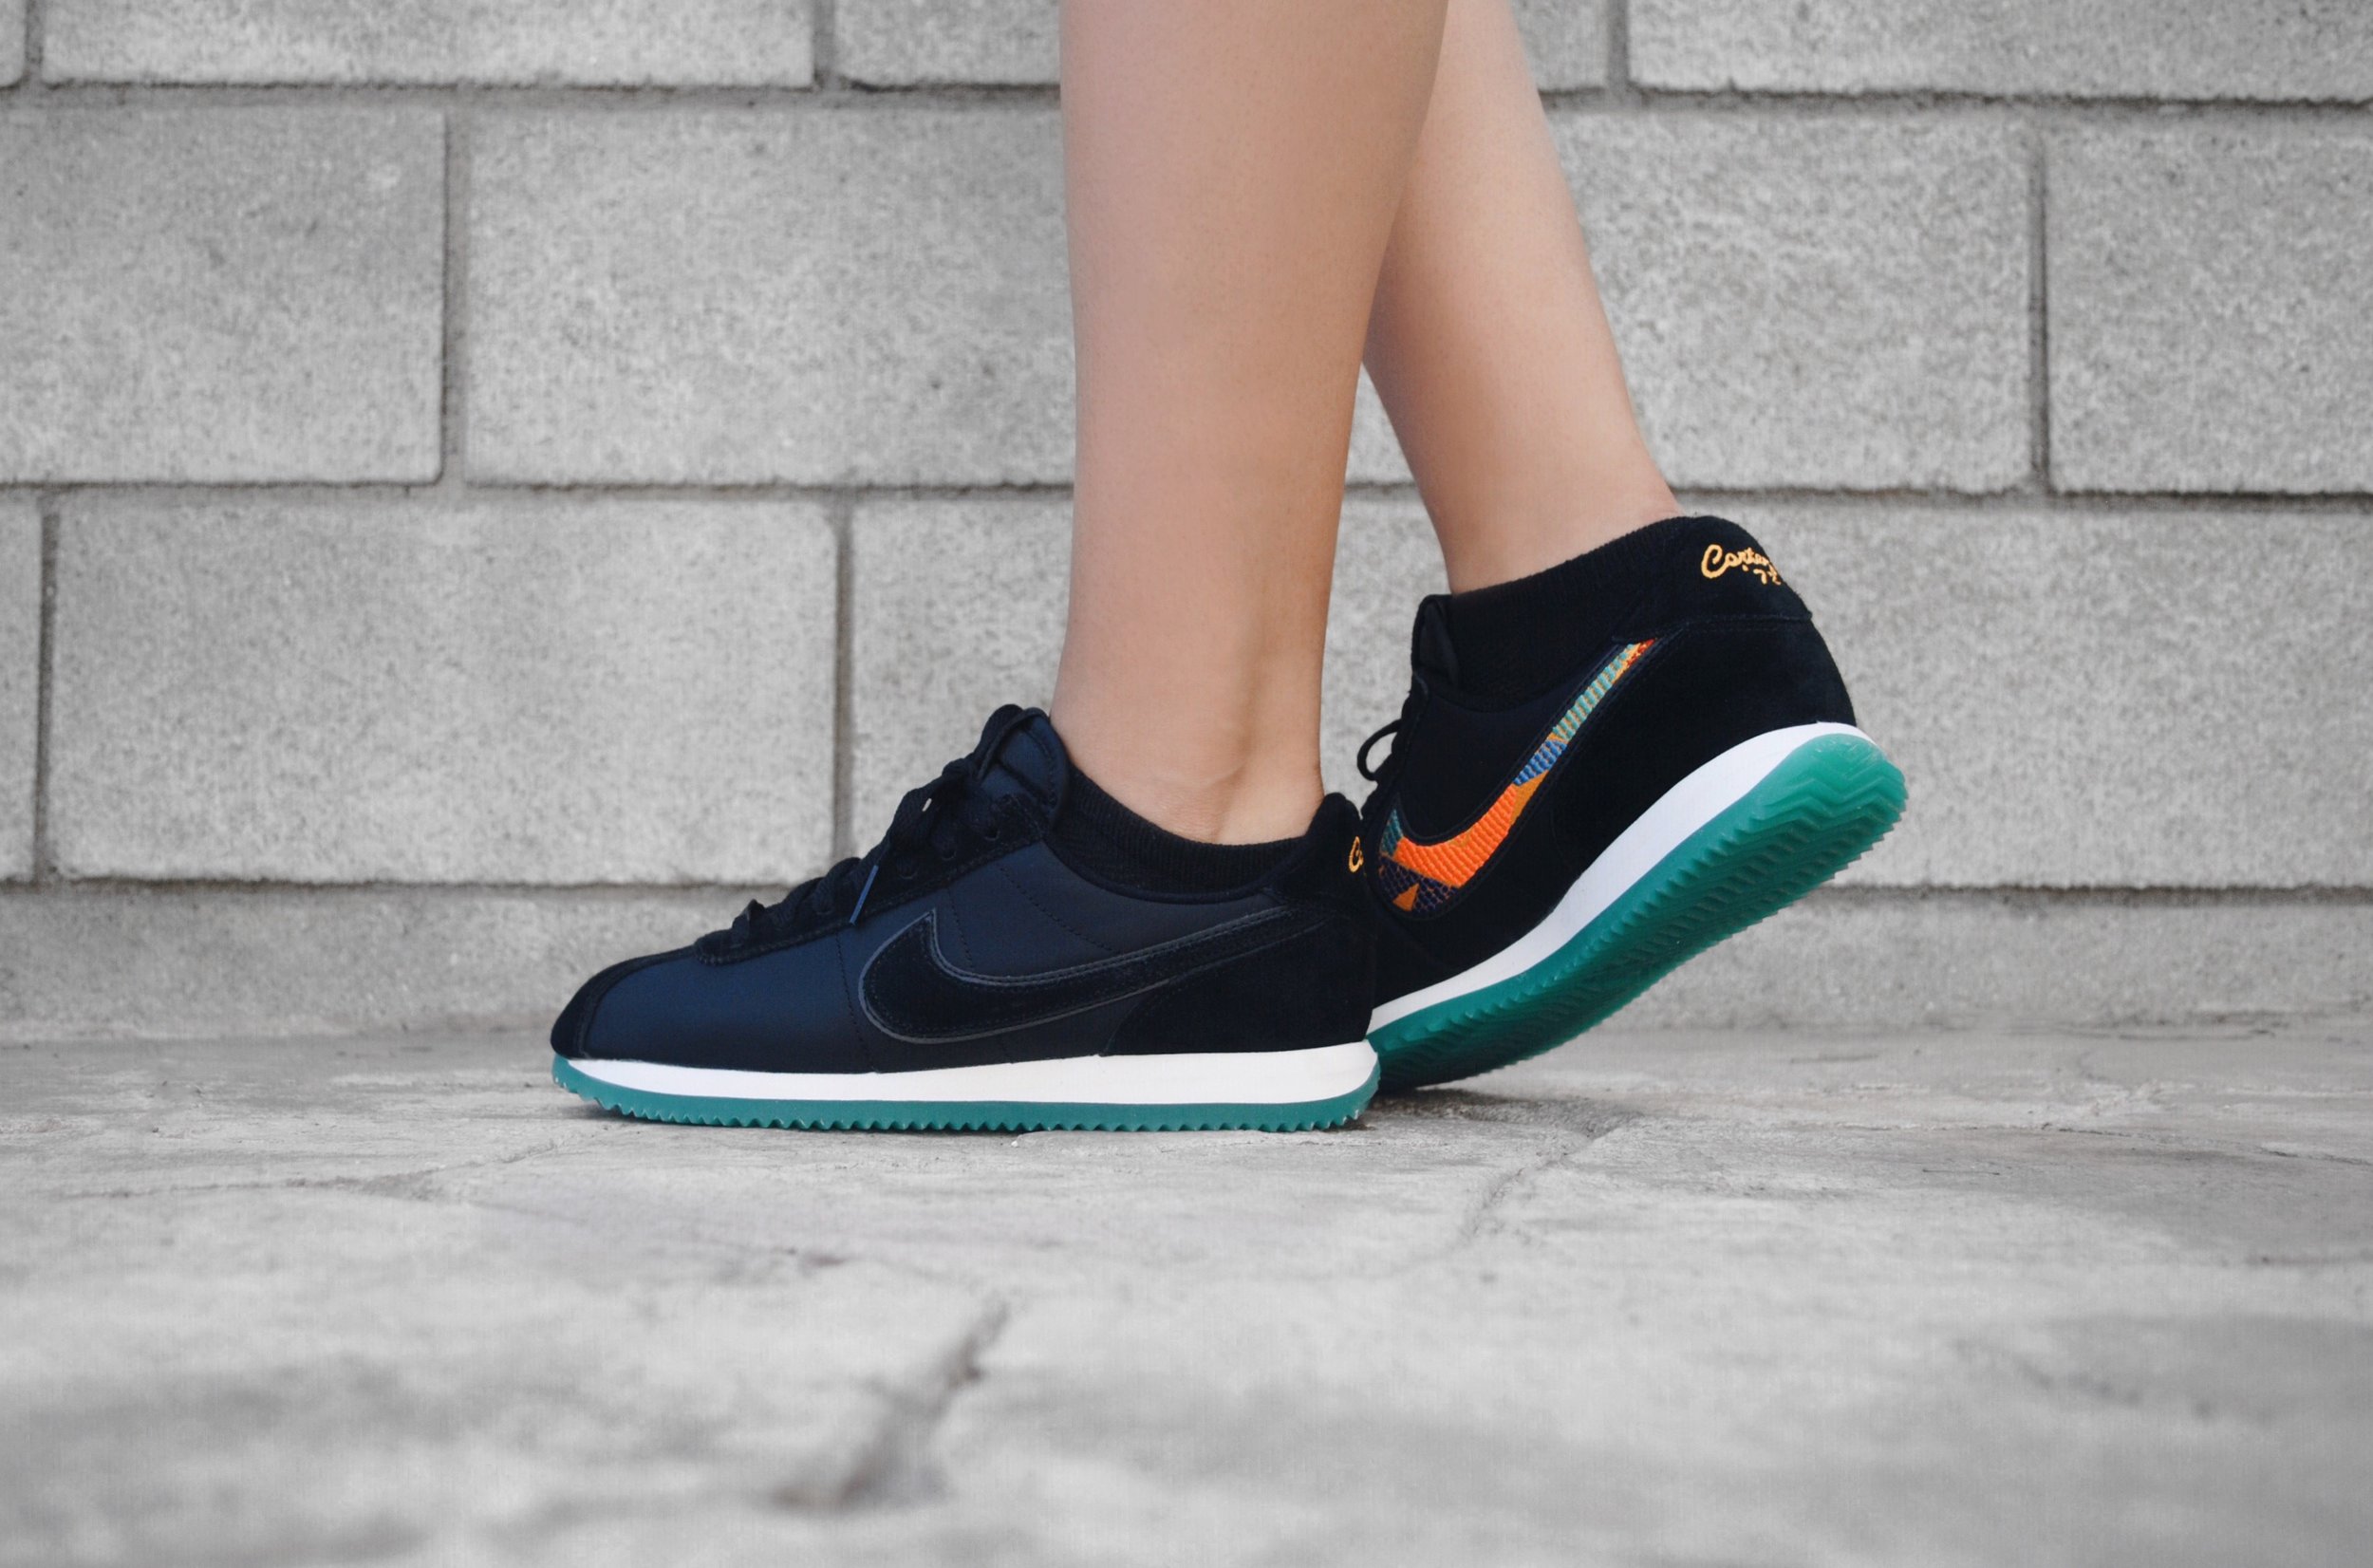 cortez nike limited edition